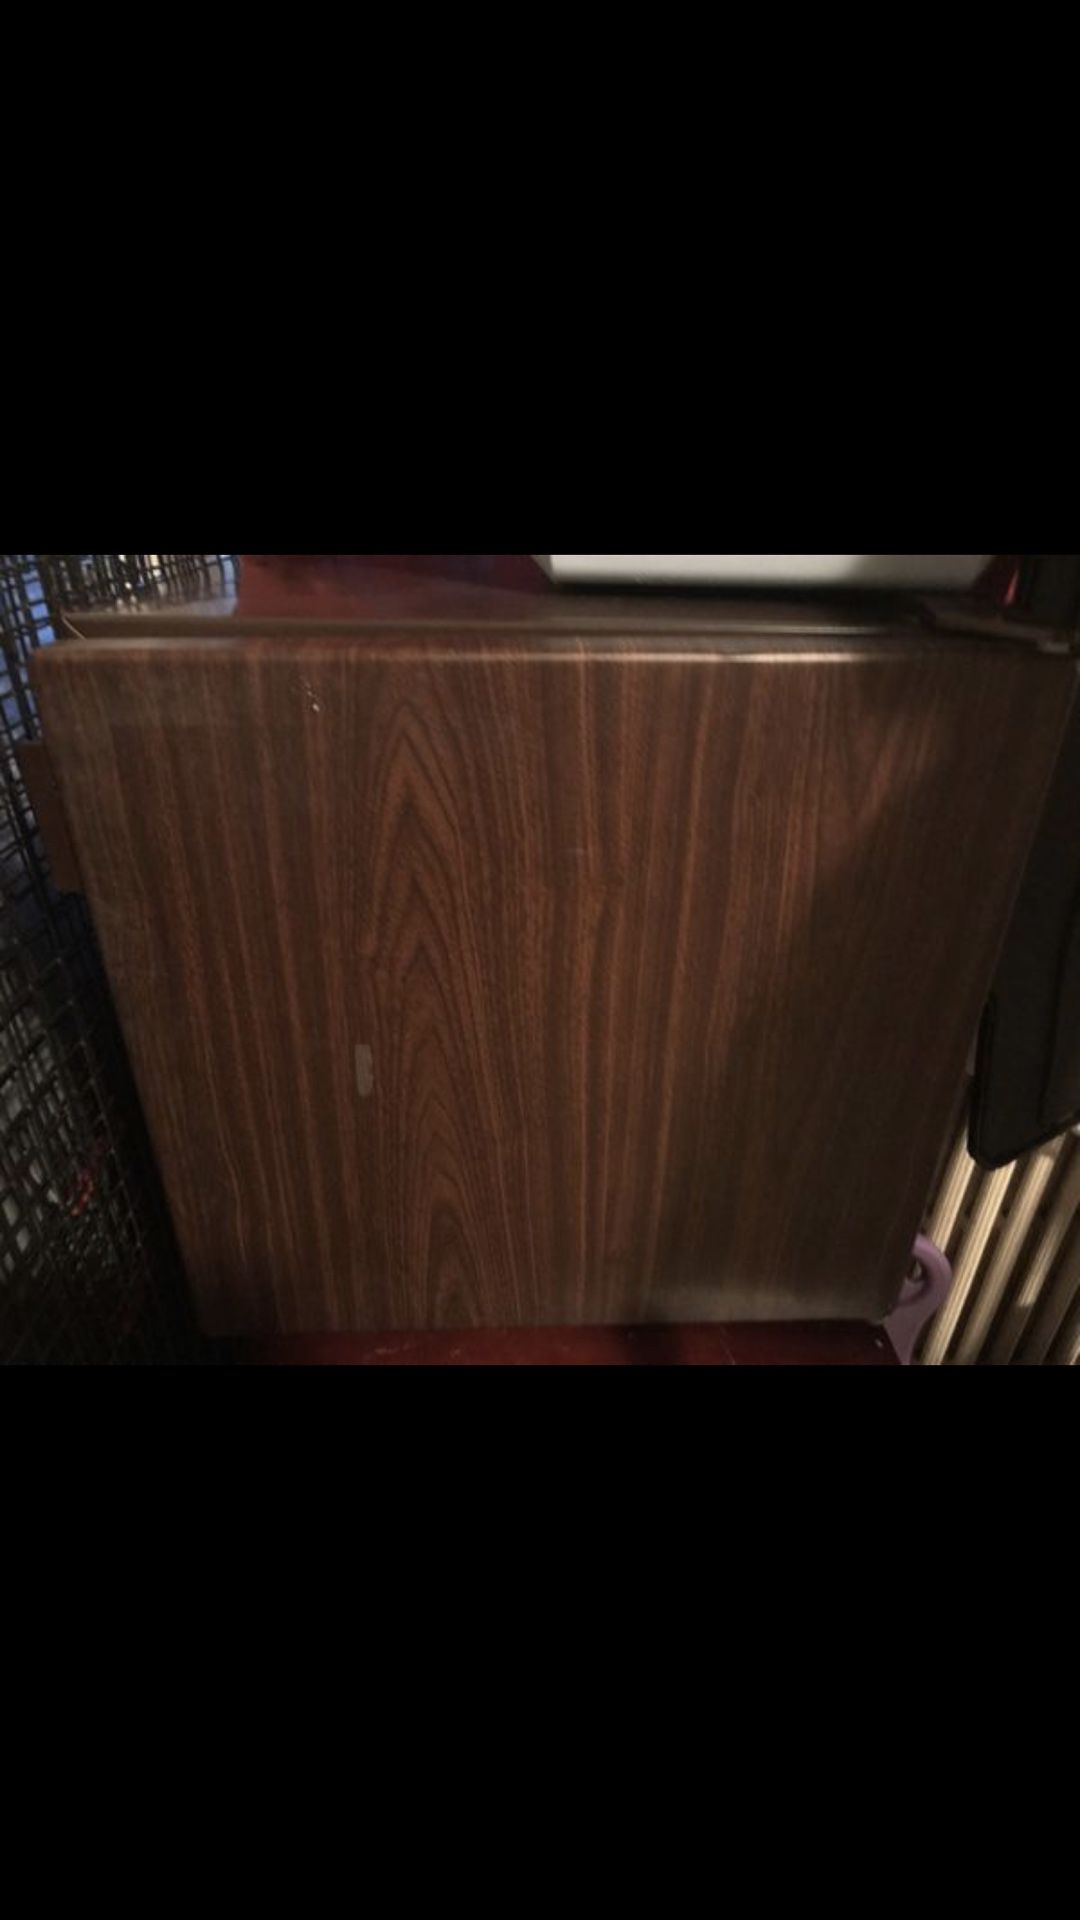 Mini refrigerator in great condition great for dorms and colleges